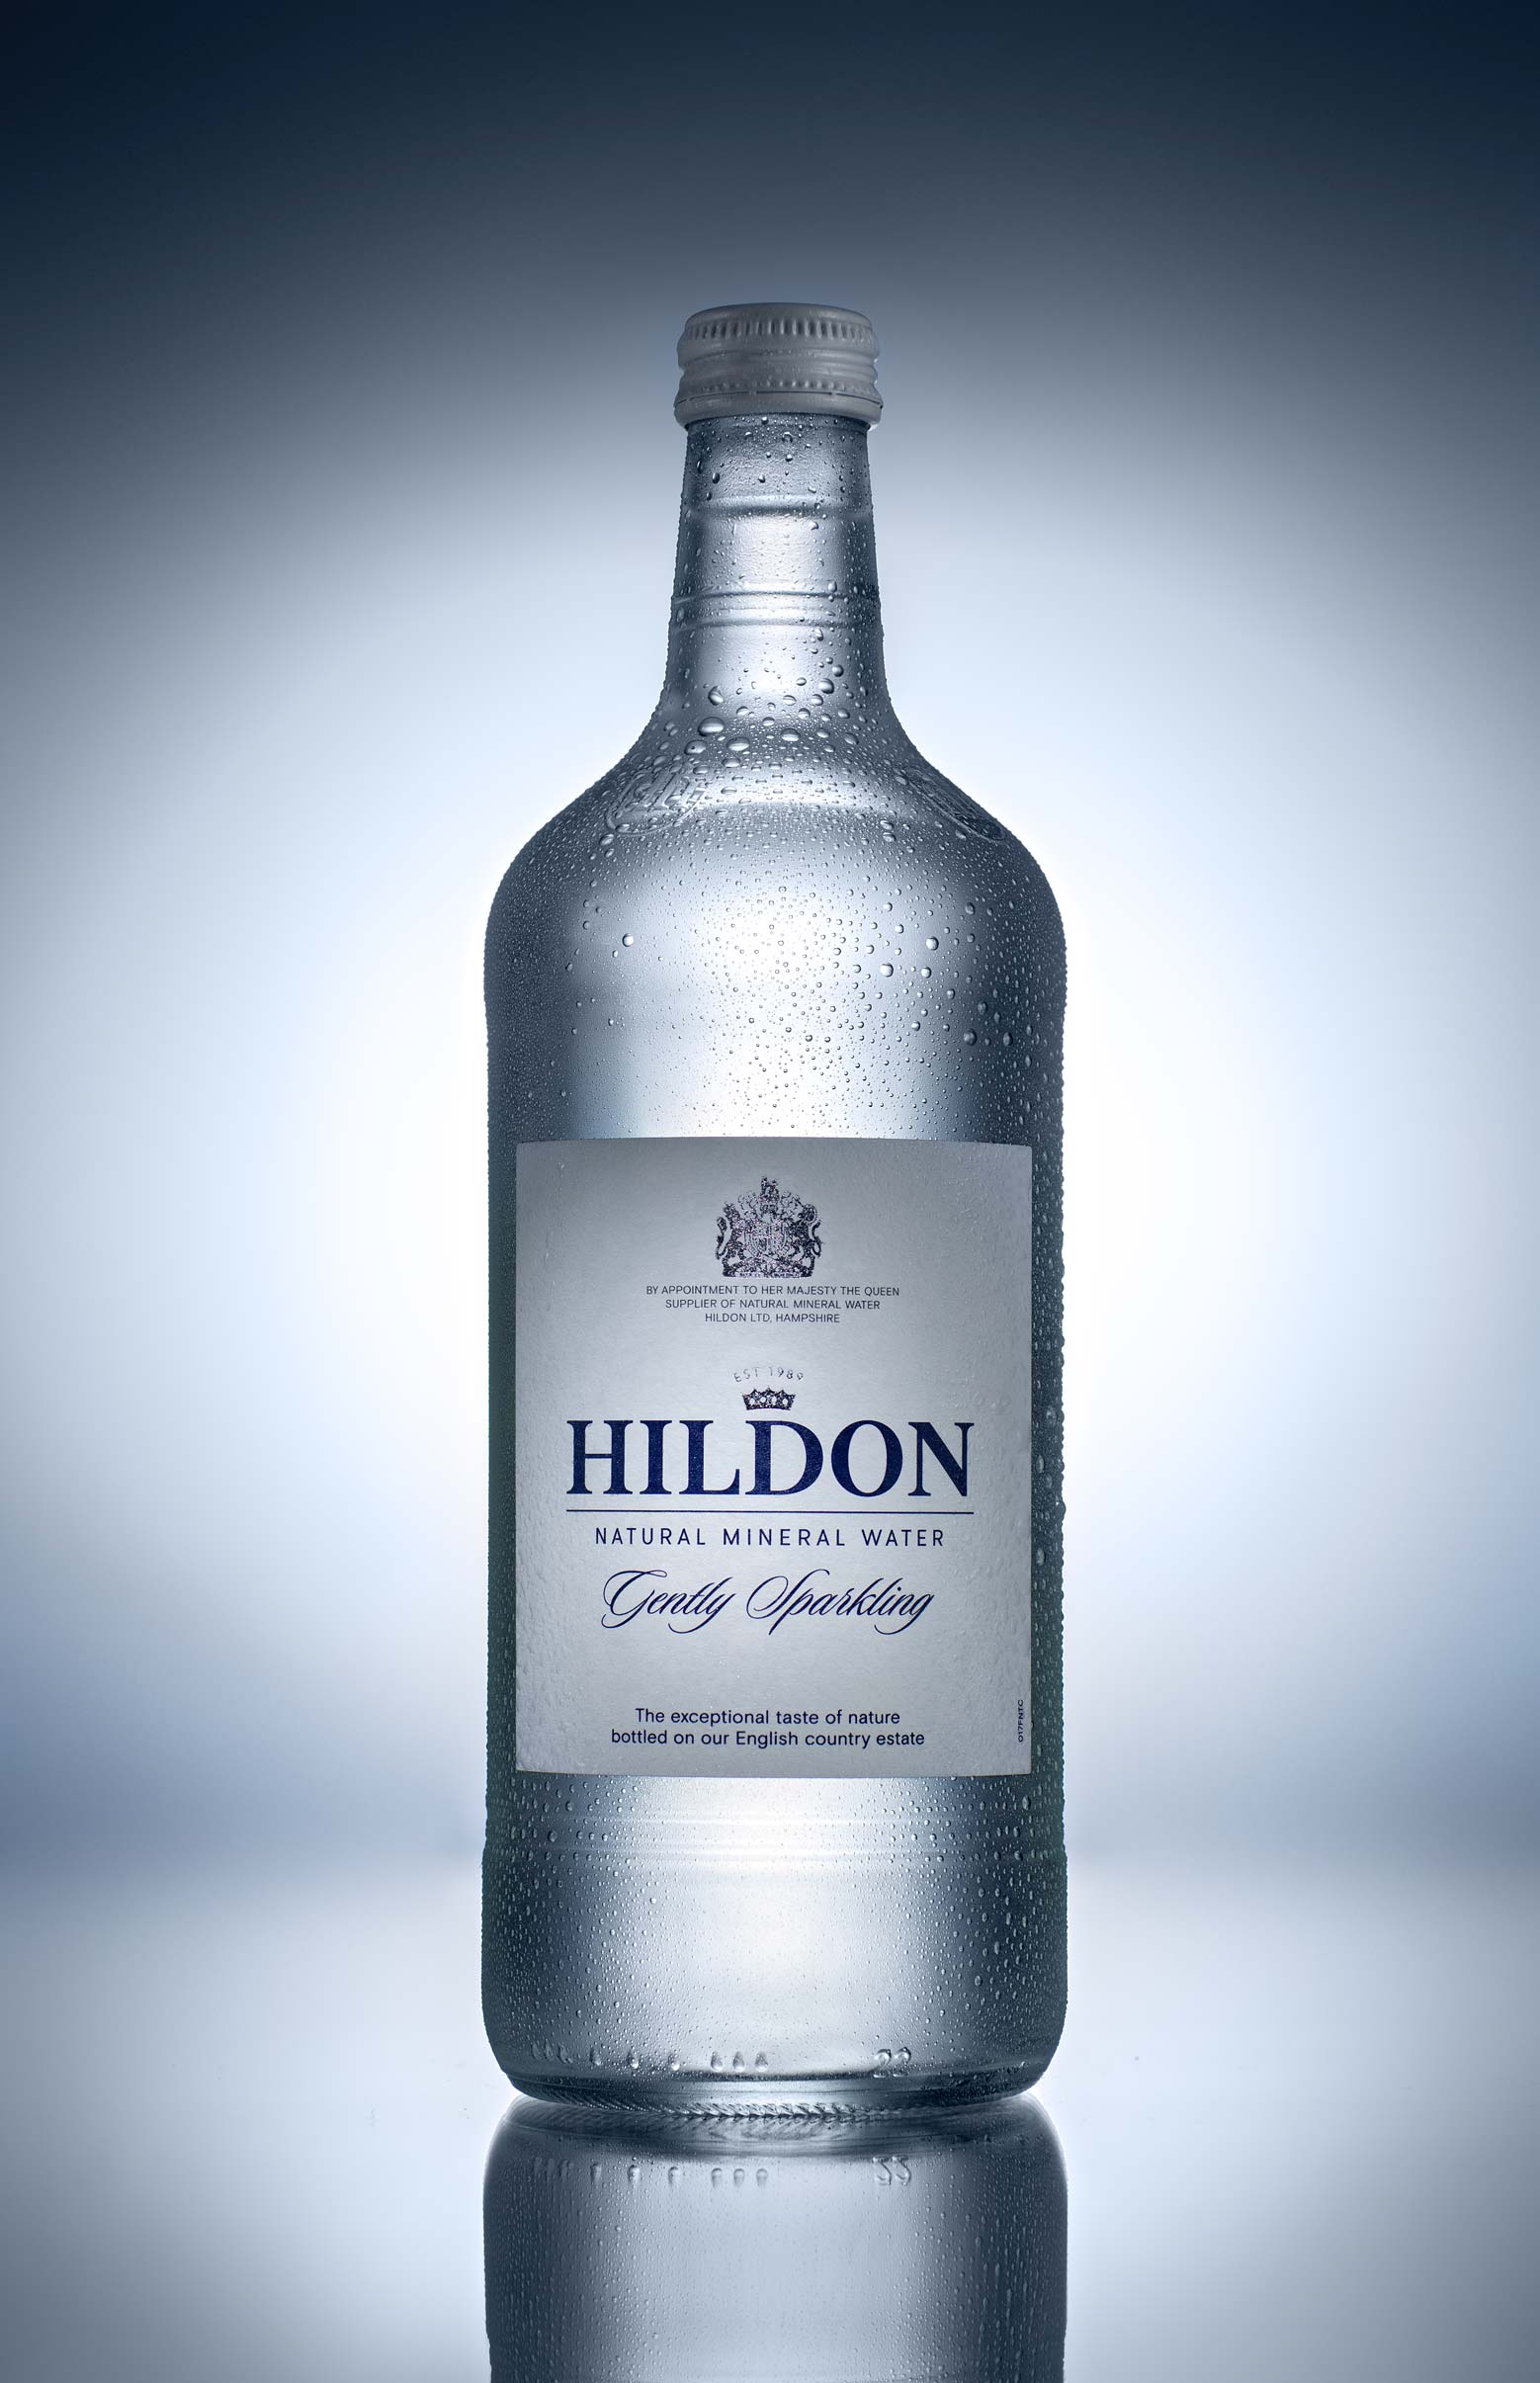 Hildon Mineral Water product photo using speedlights